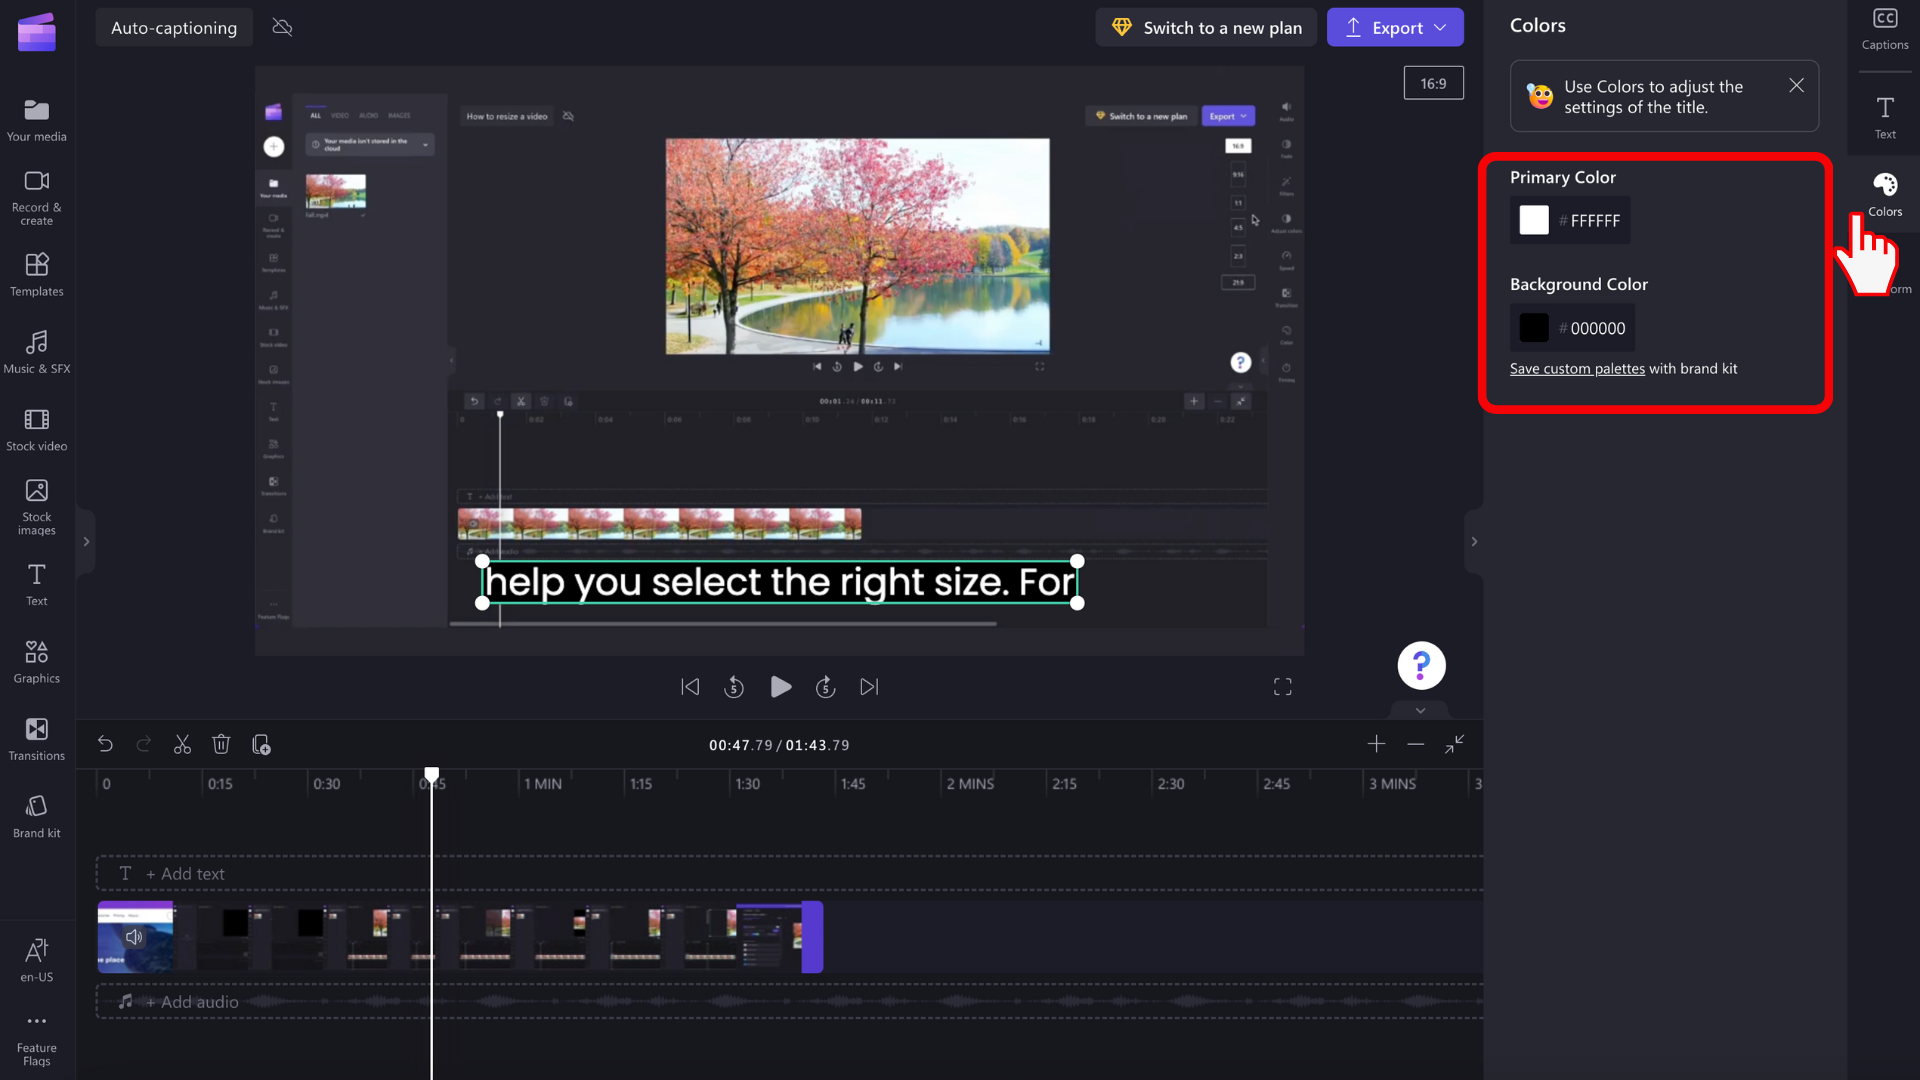 An image of a user editing the color.